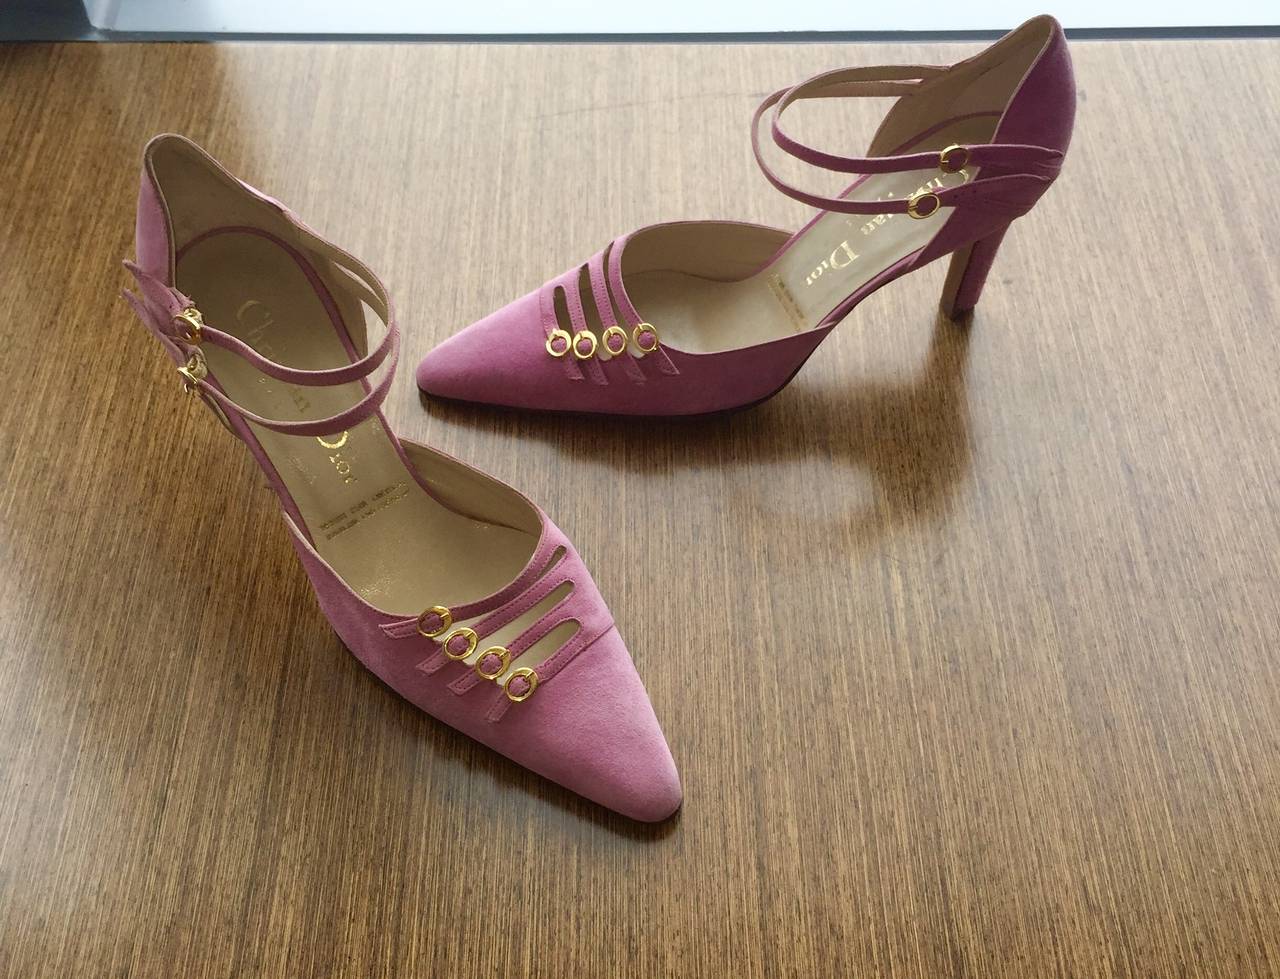 Rare Vintage Christian Dior by John Galliano Brand New Pink Cage Heel ...